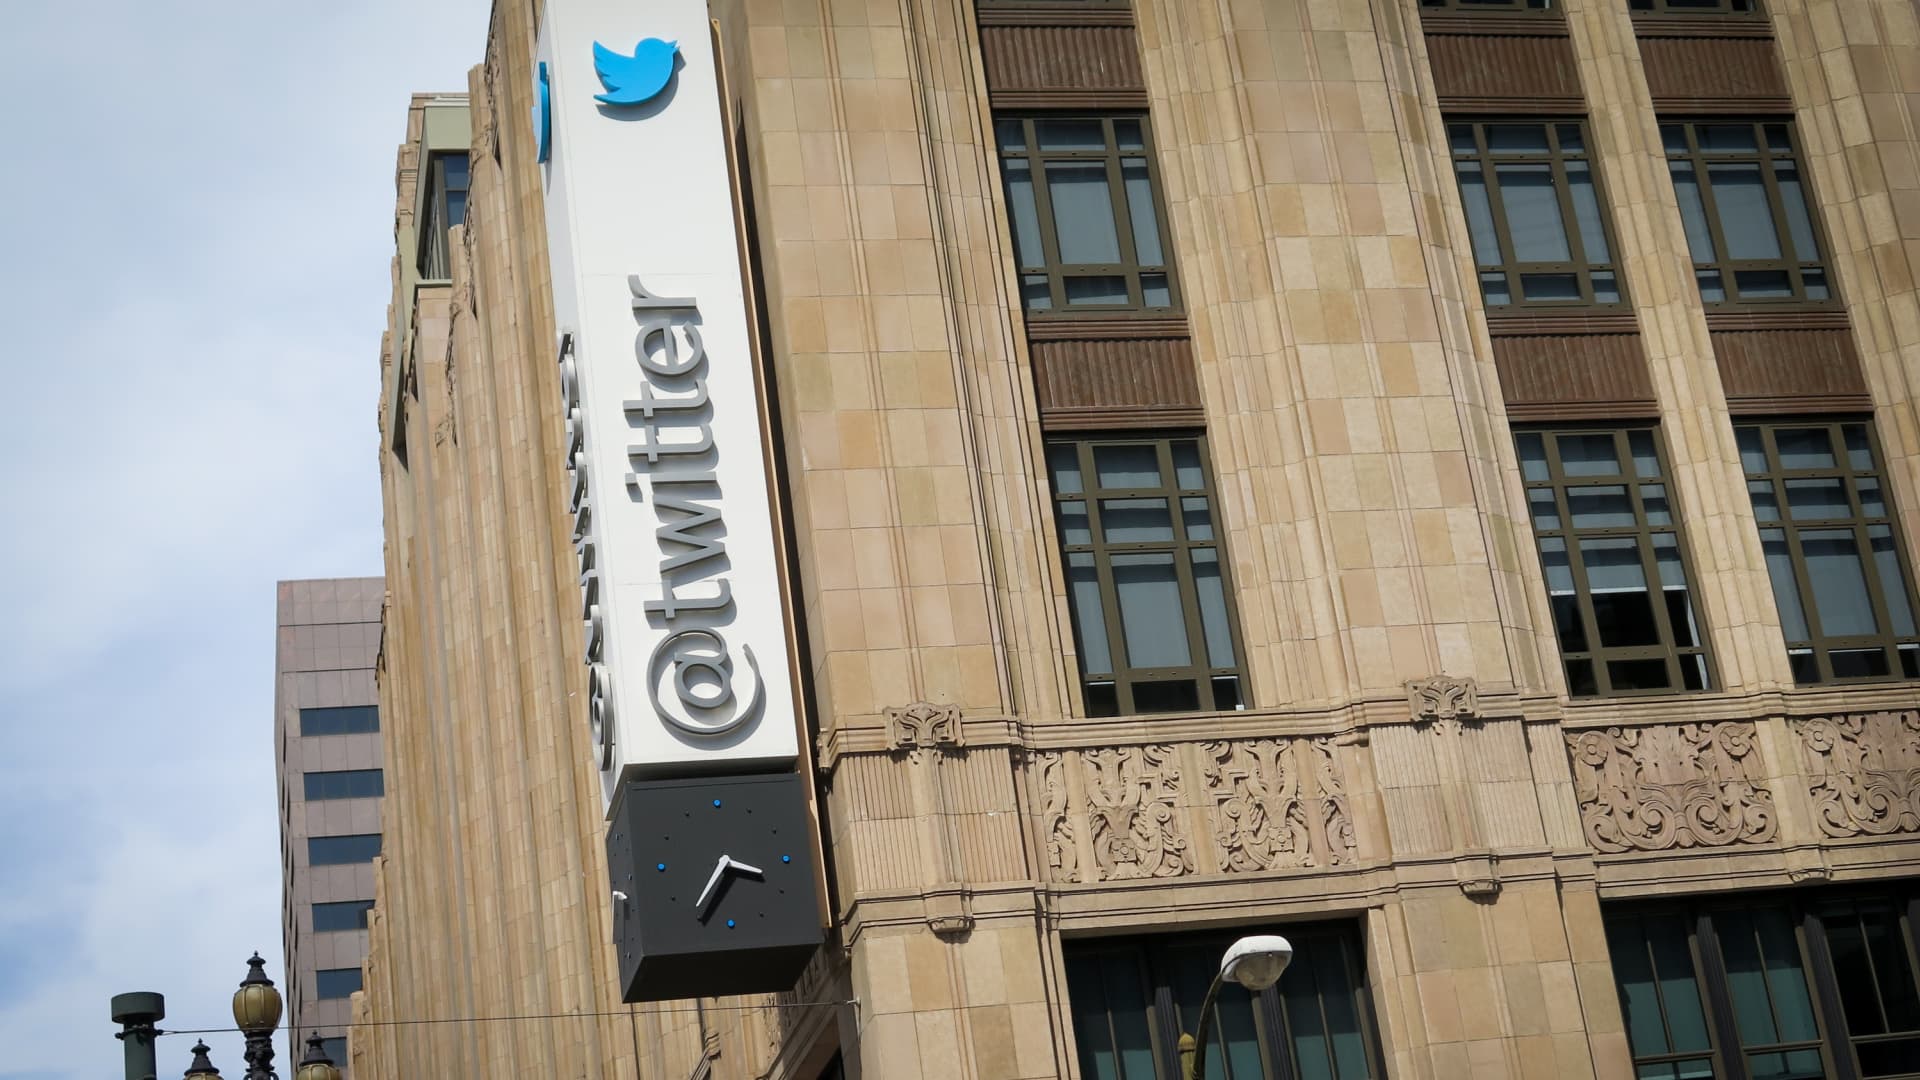 Departing Twitter employees say layoffs have started as Elon Musk takes over